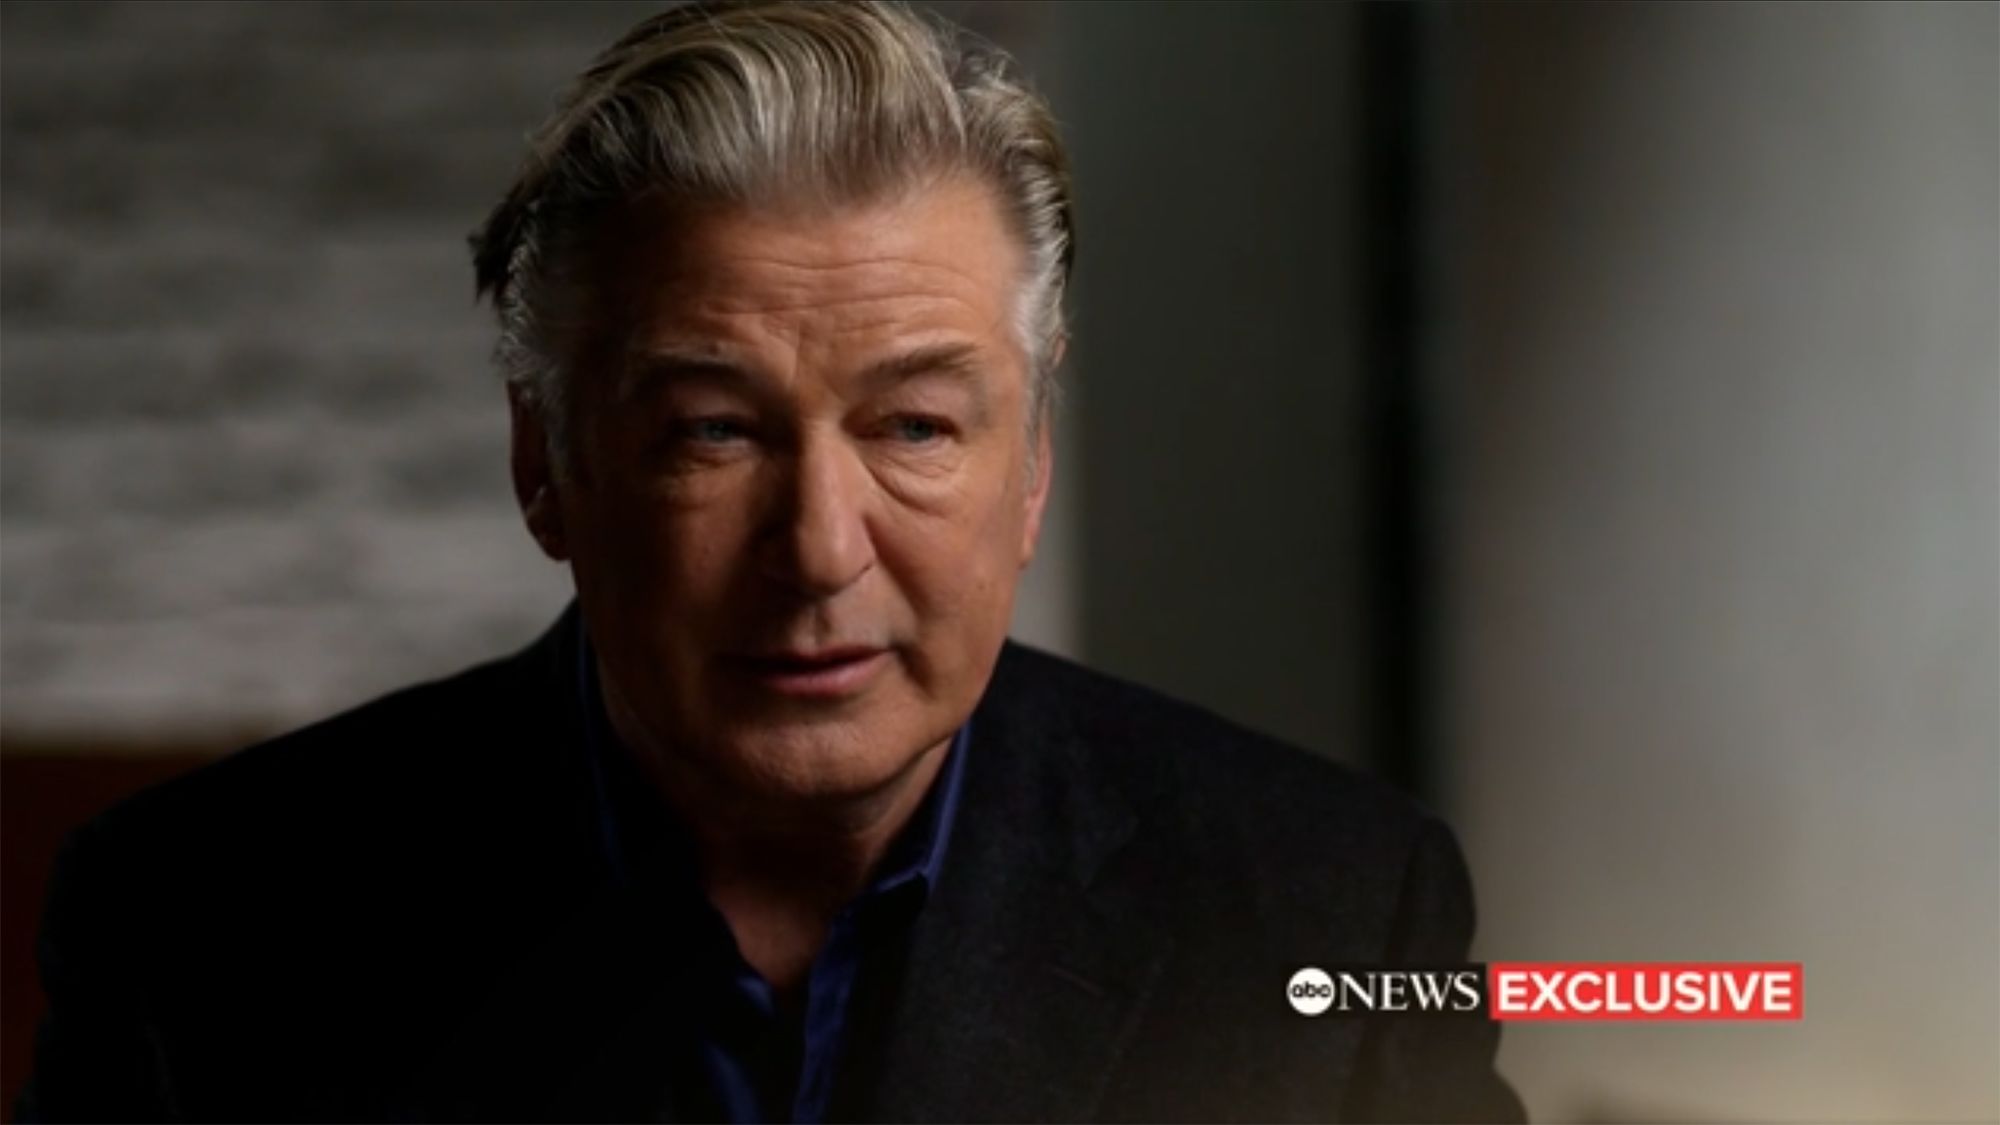 A series of videos exclusively obtained by NBC News show #AlecBaldwin , Alec Baldwin